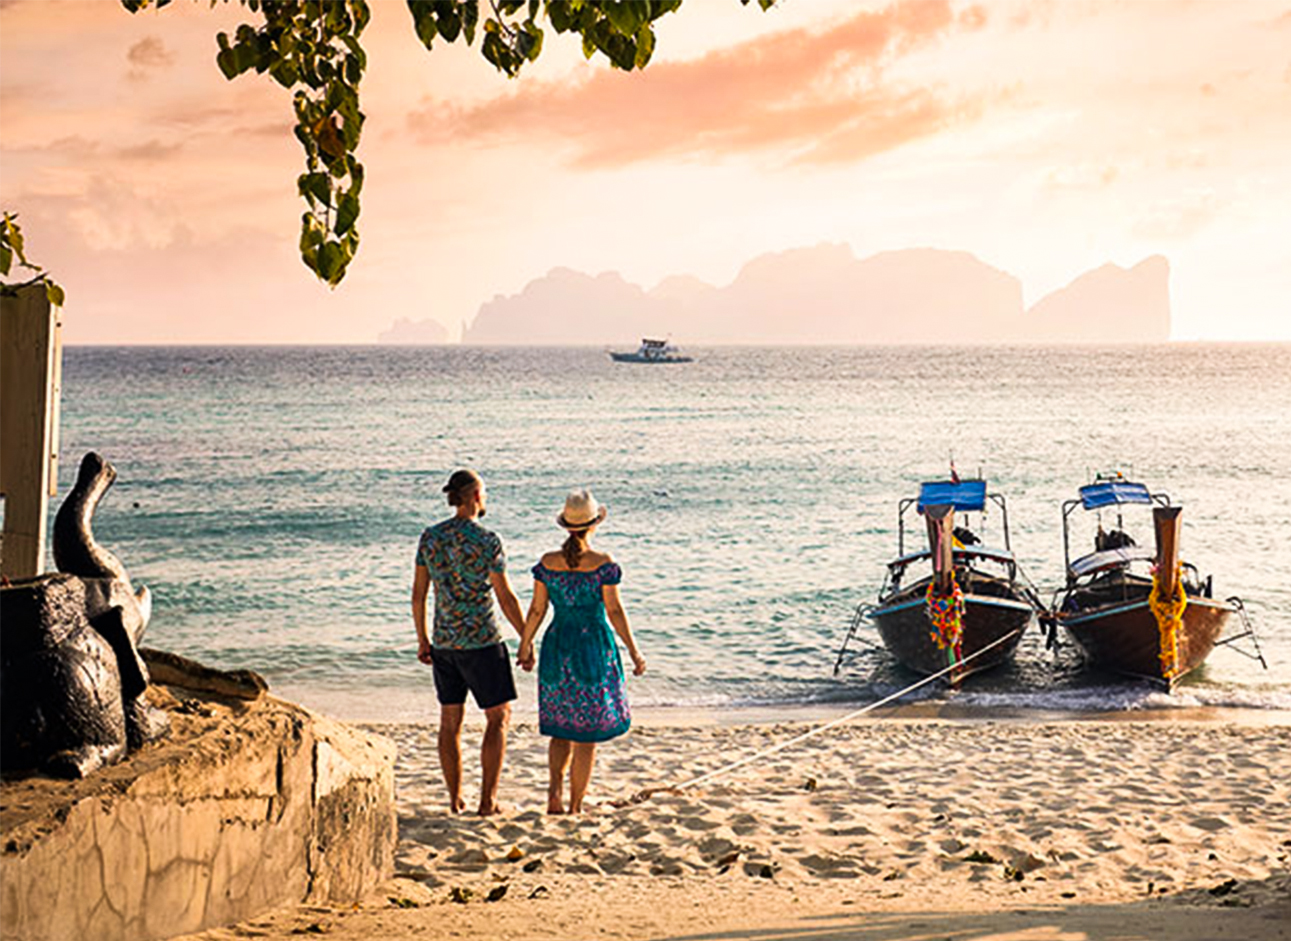 Honeymoon - Celebrate your love with a romantic and unforgettable honeymoon